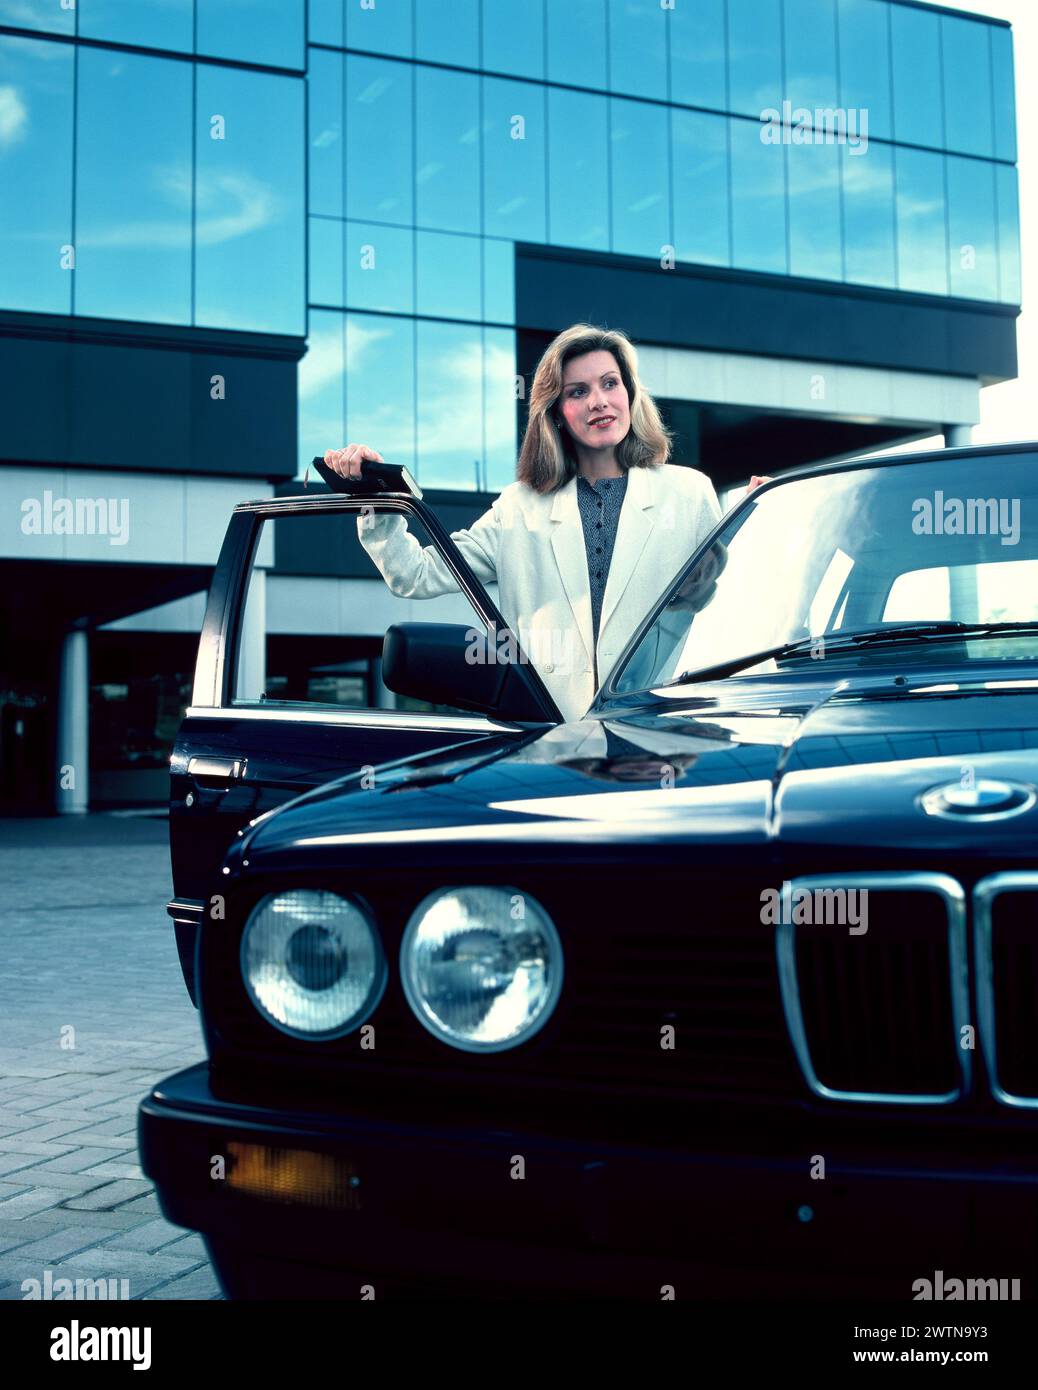 Young woman outside office building by her vintage BMW car. Stock Photo